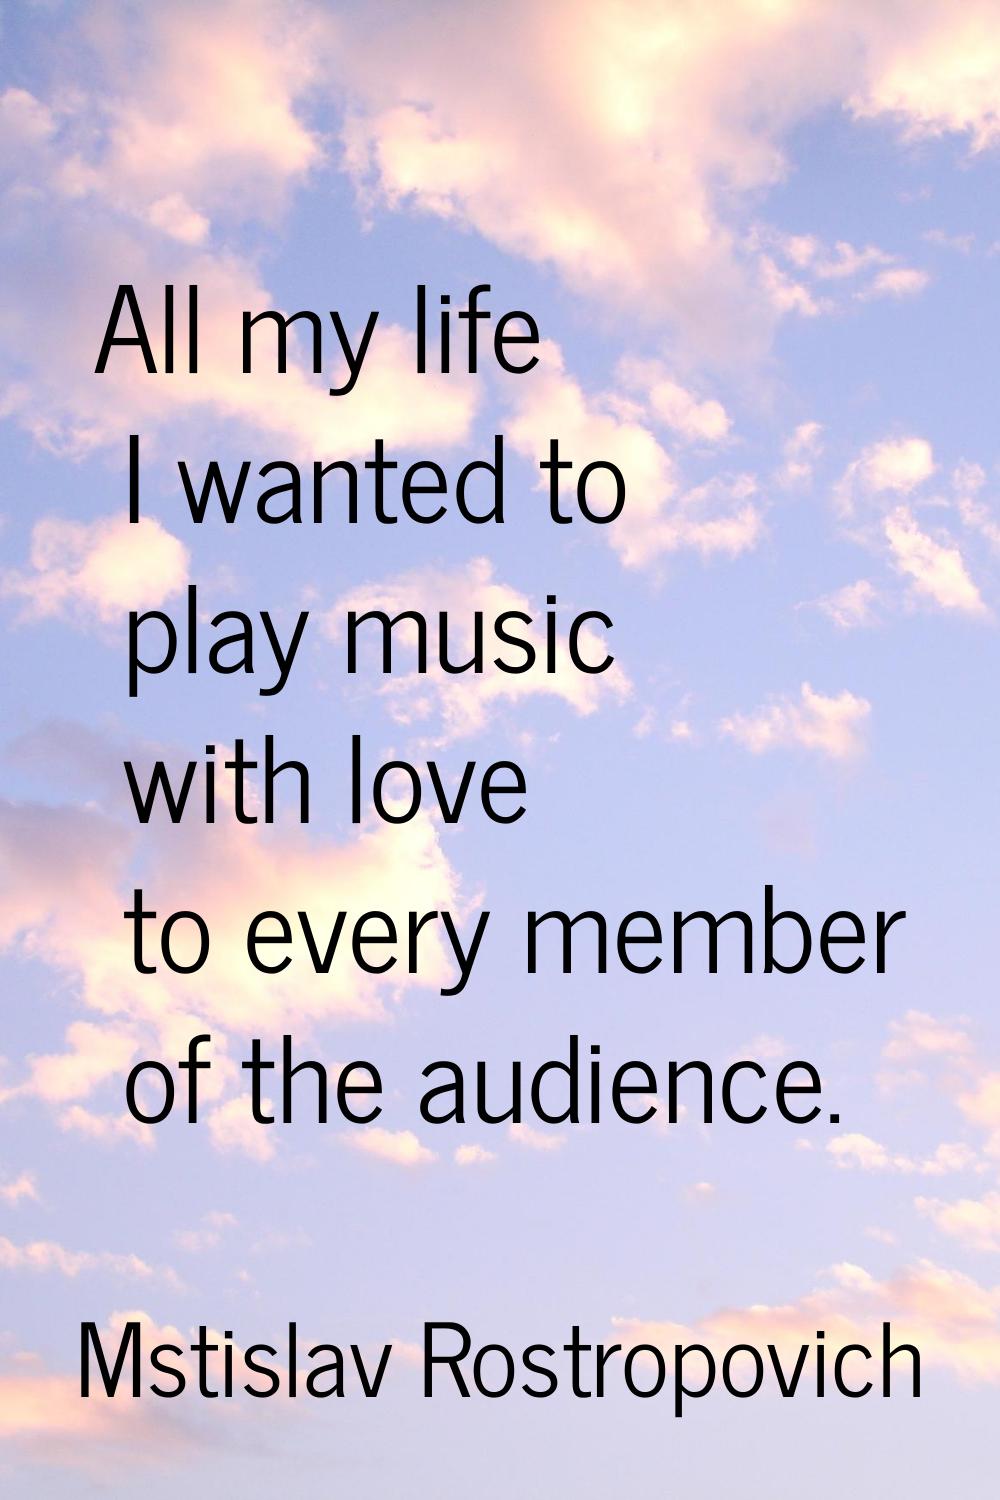 All my life I wanted to play music with love to every member of the audience.